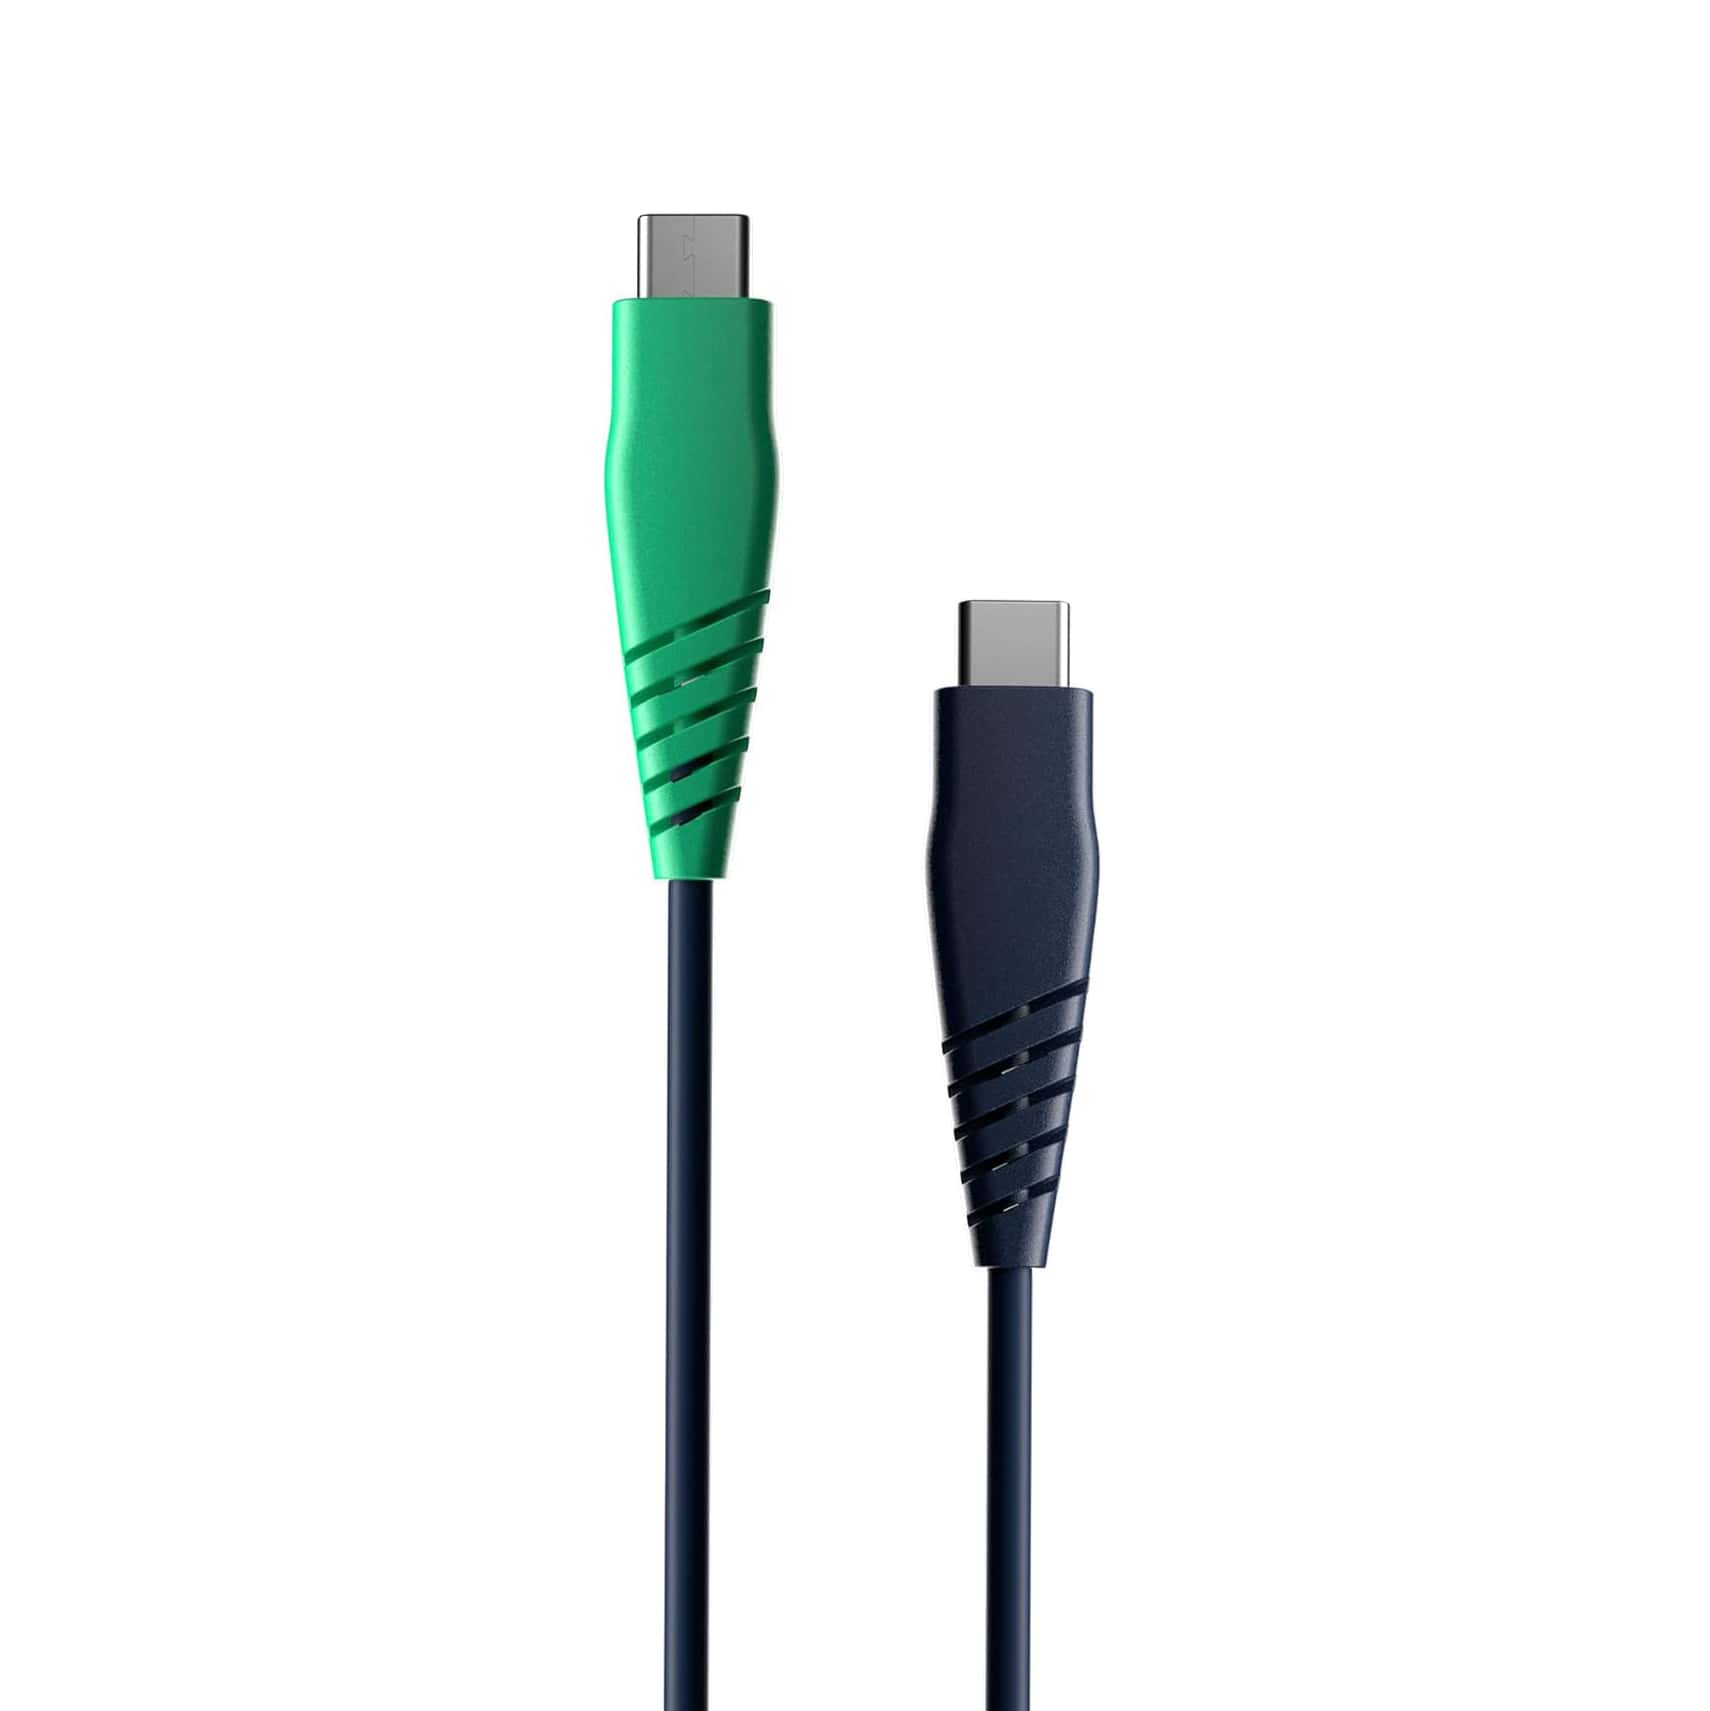 Skullcandy Line USB C to USB C 60W Cable 1.2M – Blue/Green   |  Smartphone Accessories  |  Cables  |  USB-C to C Cables  |